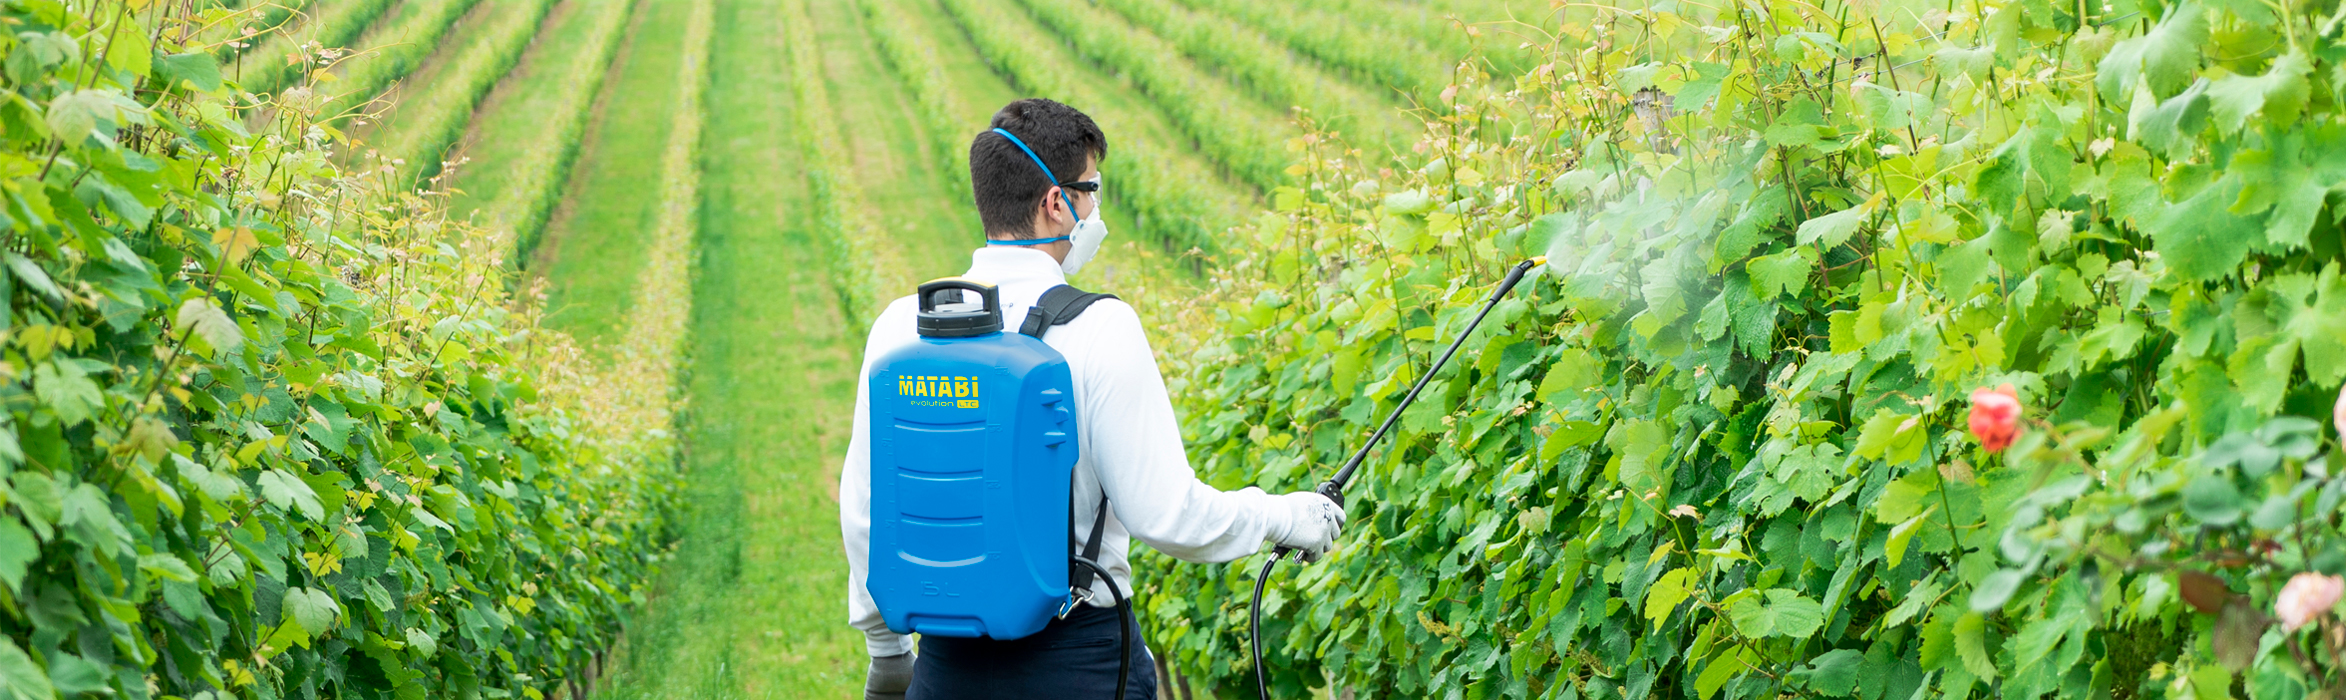 Backpack Sprayers: Multi-Purpose Tools for Farming and Gardening